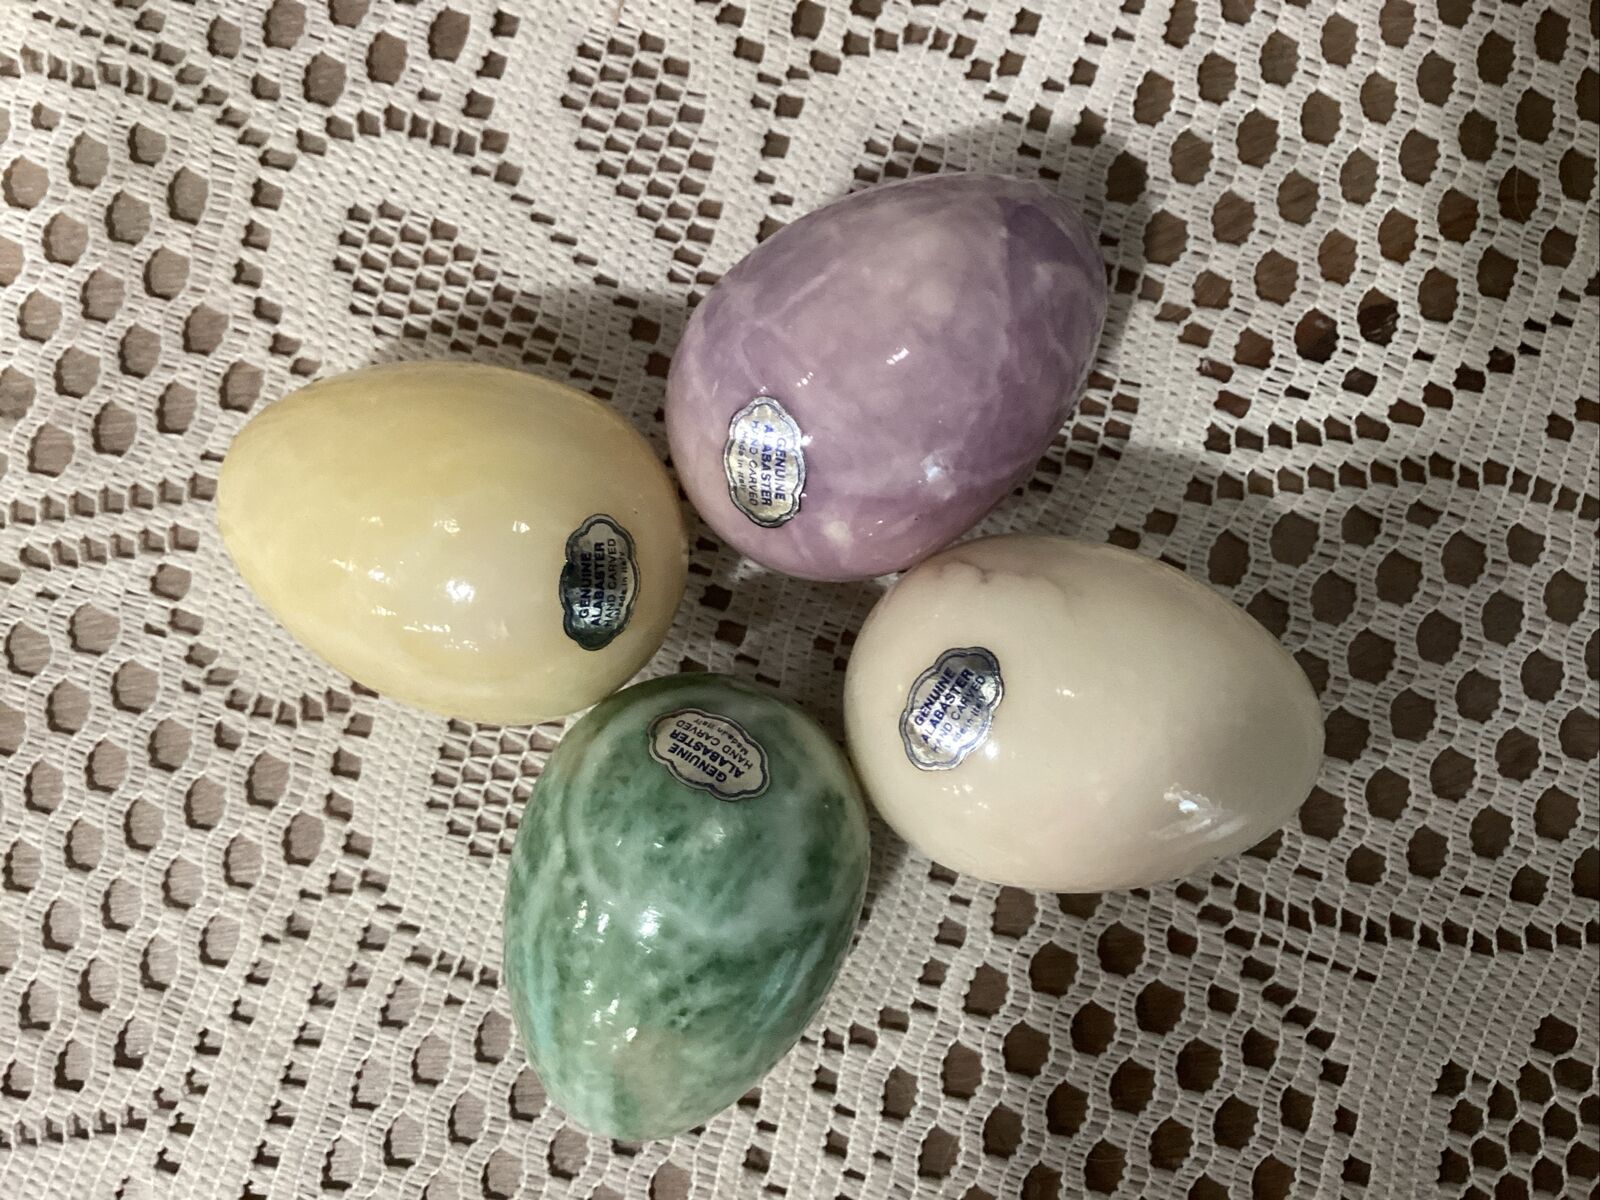 Genuine Alabaster Stone Hand Crafted Italy Eggs Figurines